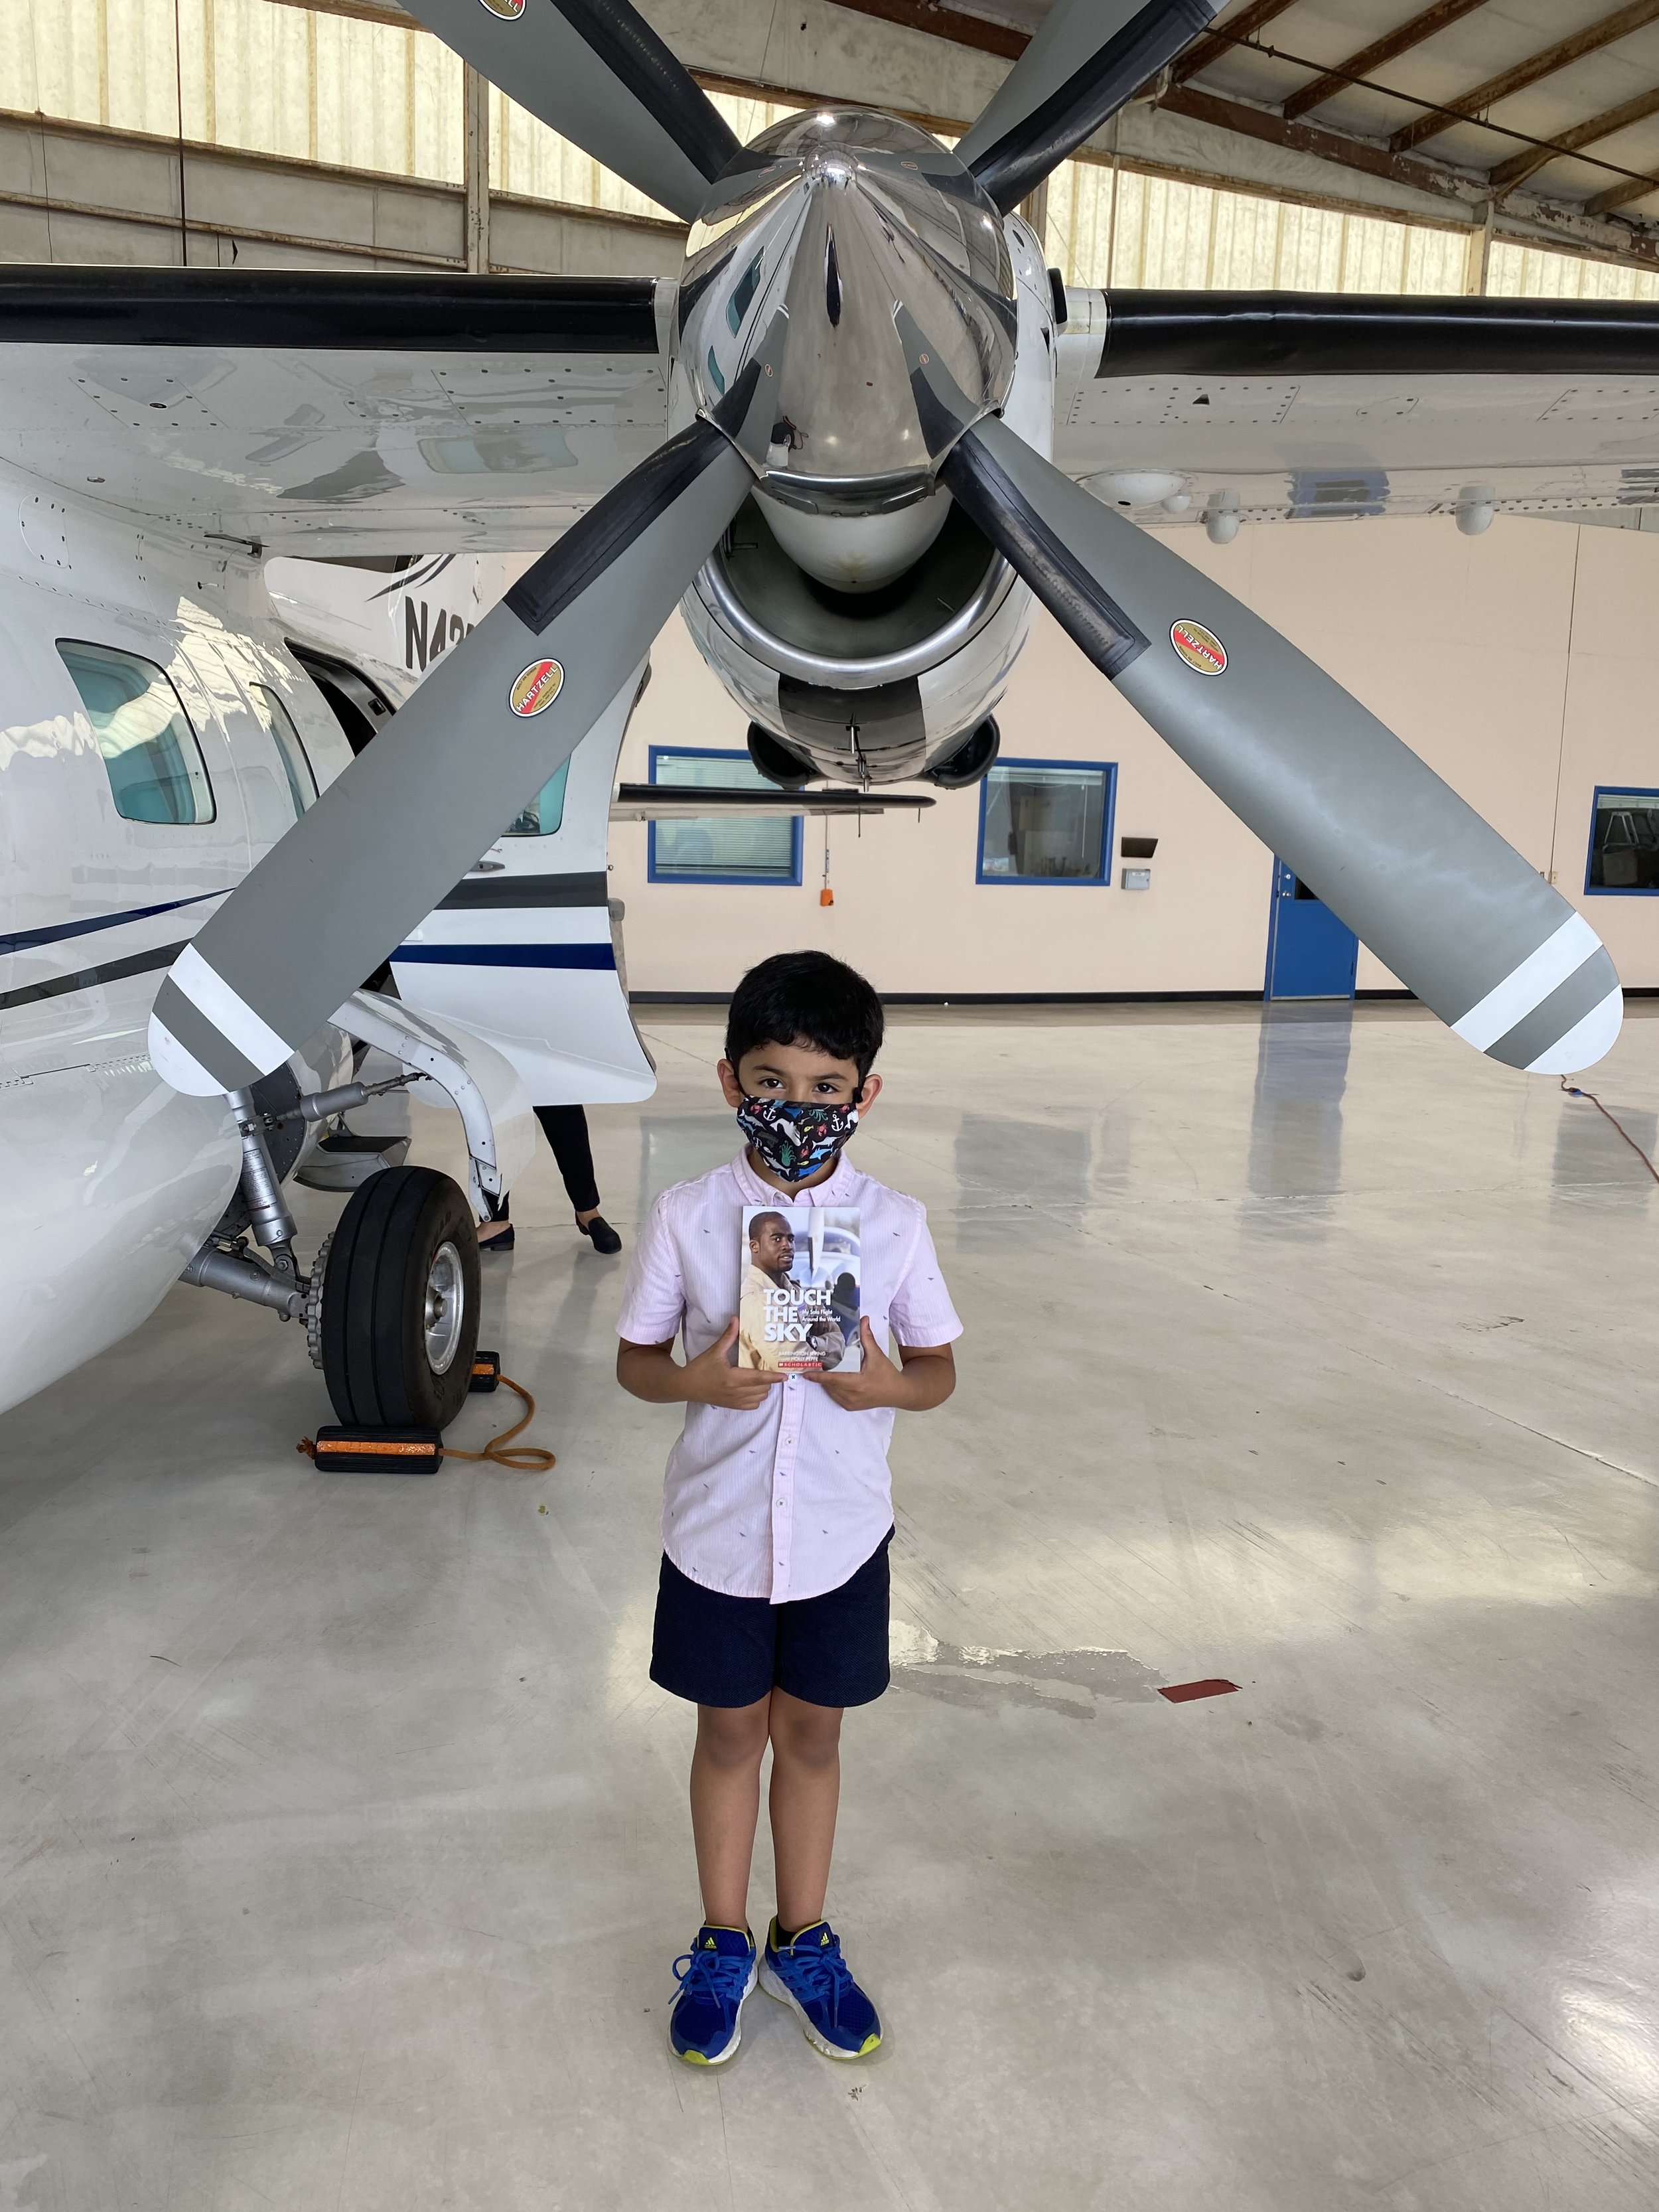 Student Diego with book under propeller.jpeg